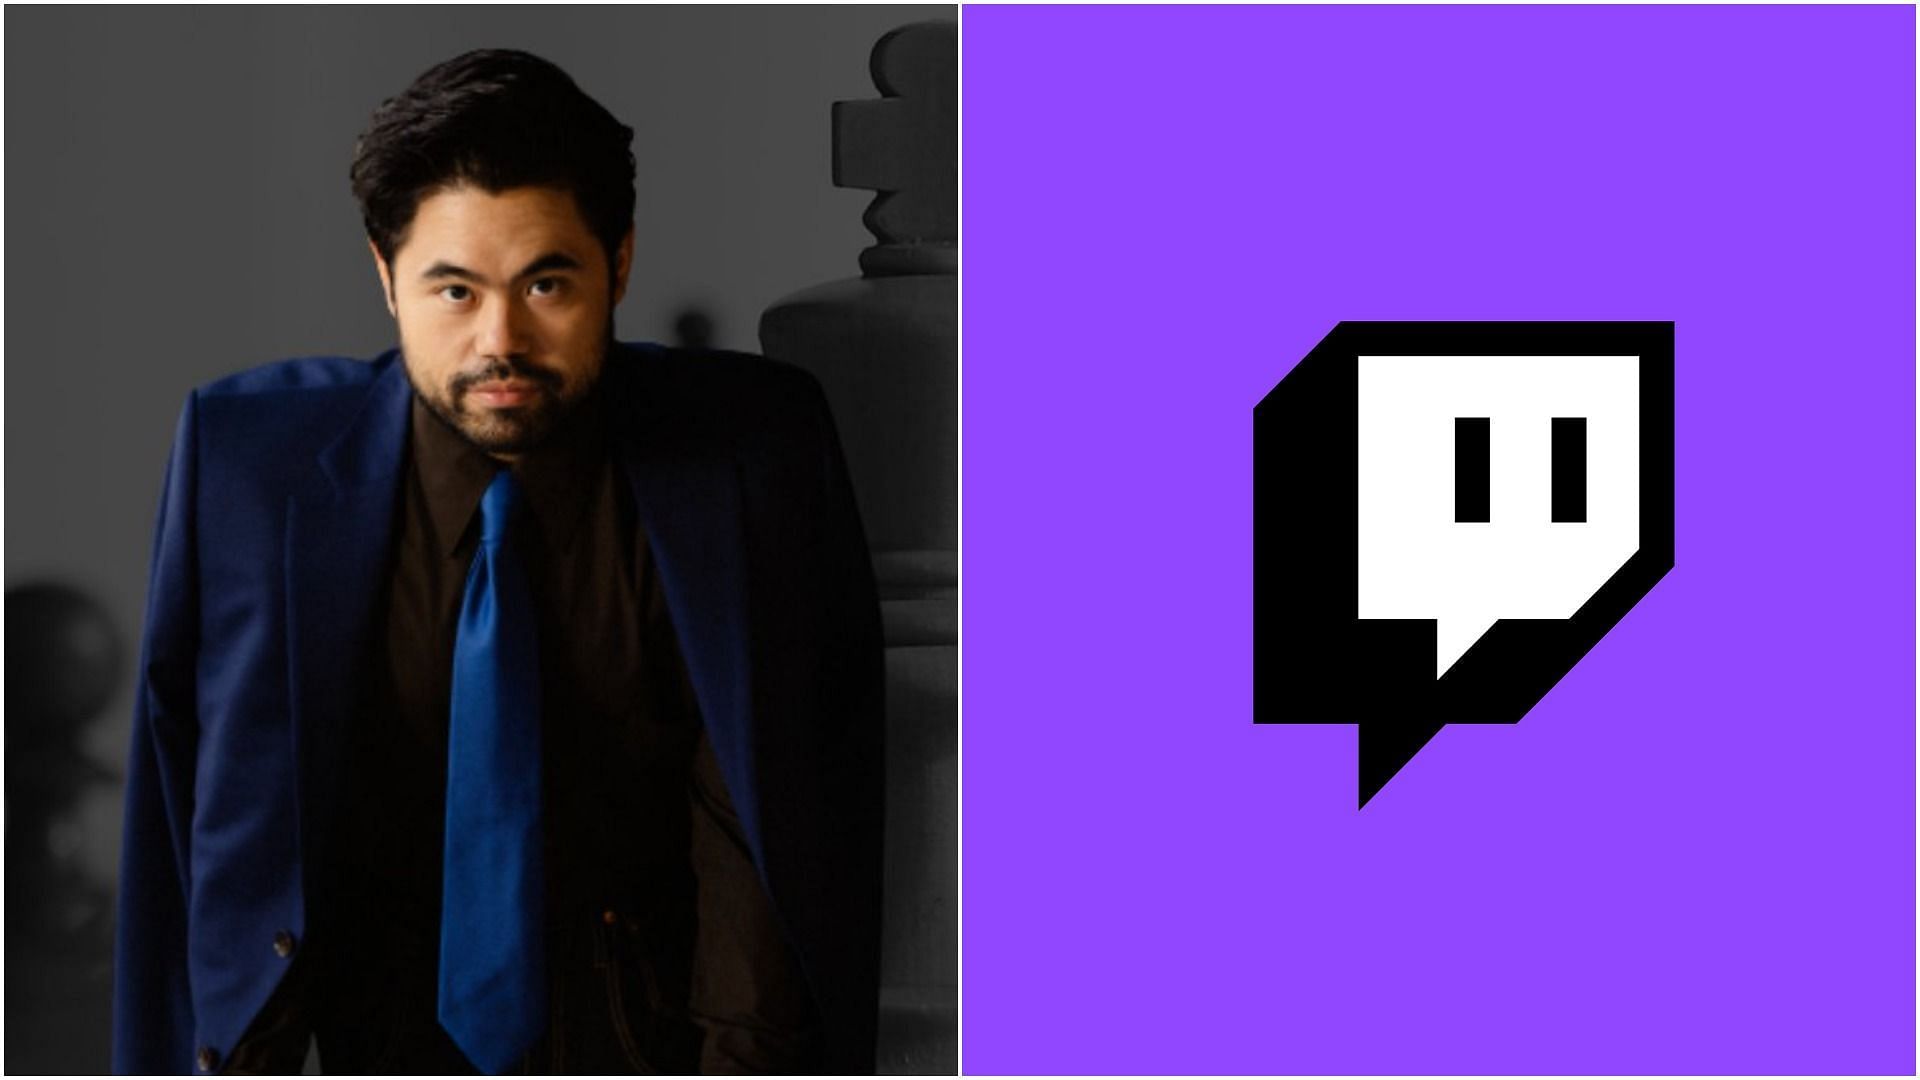 GMHikaru announces his ban from Twitch was lifted a day early (Image via Sportskeeda)